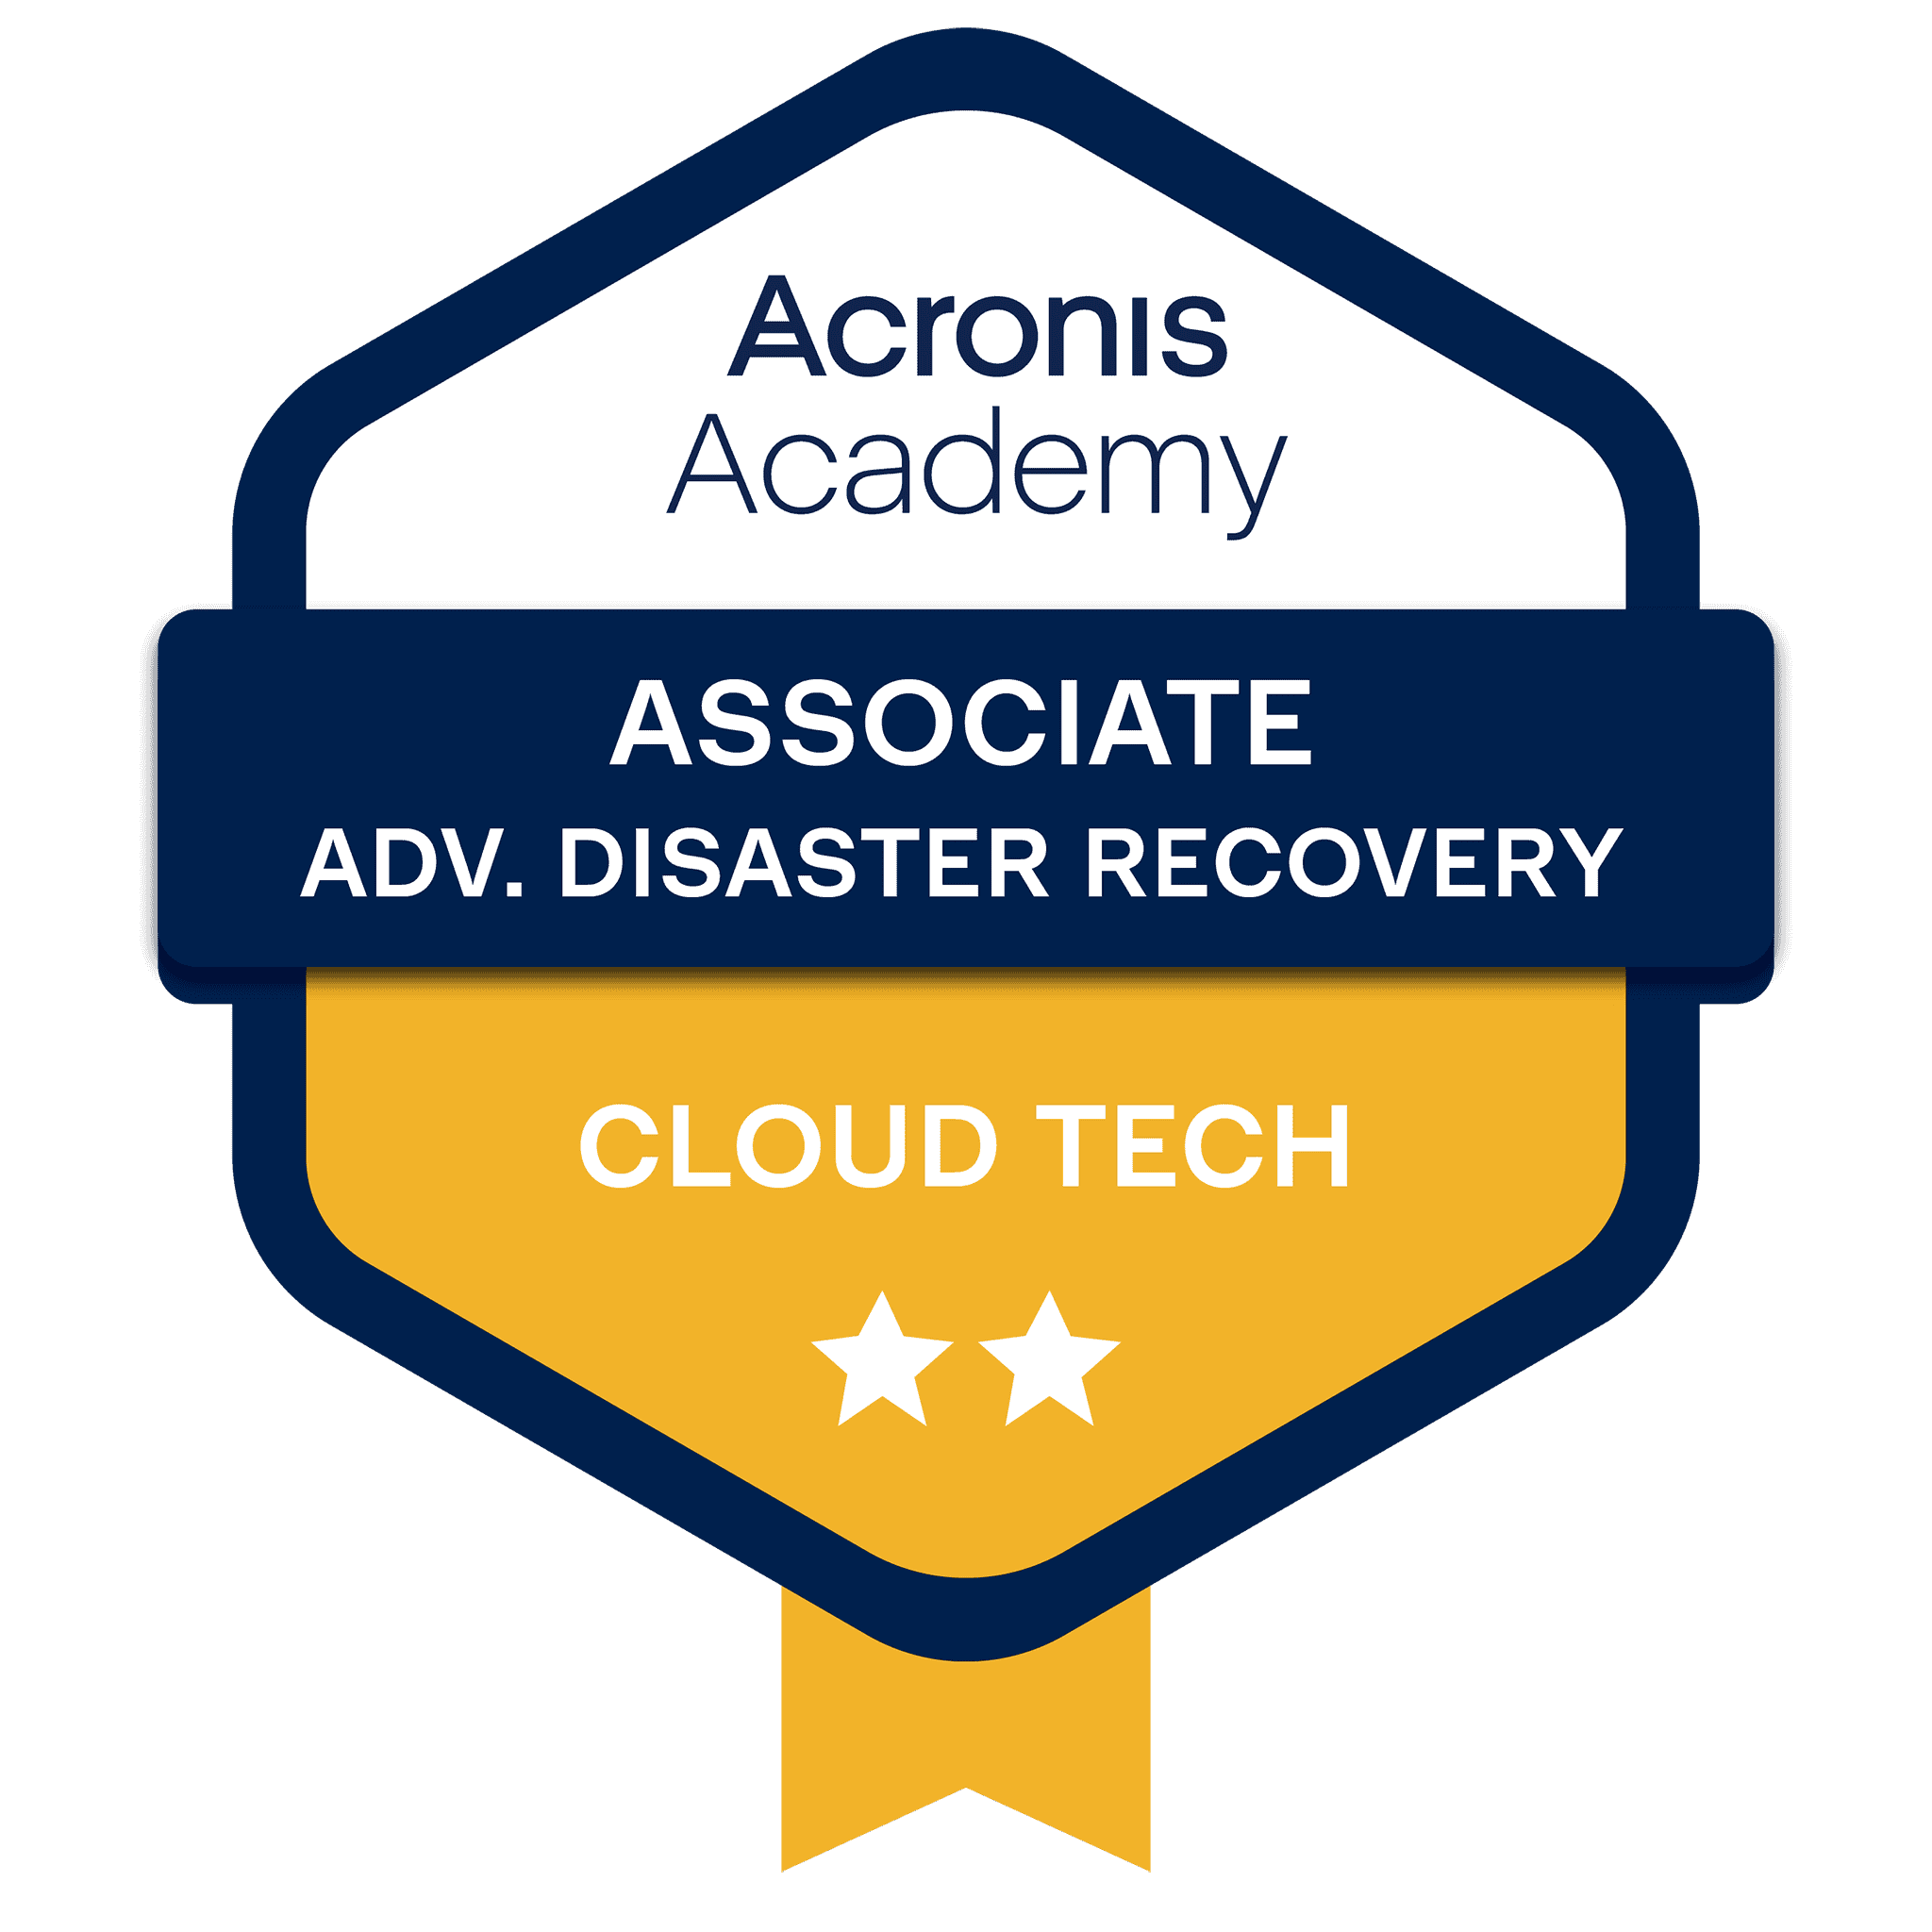 Certification Acronis Associate ADV. Disaster Recovery